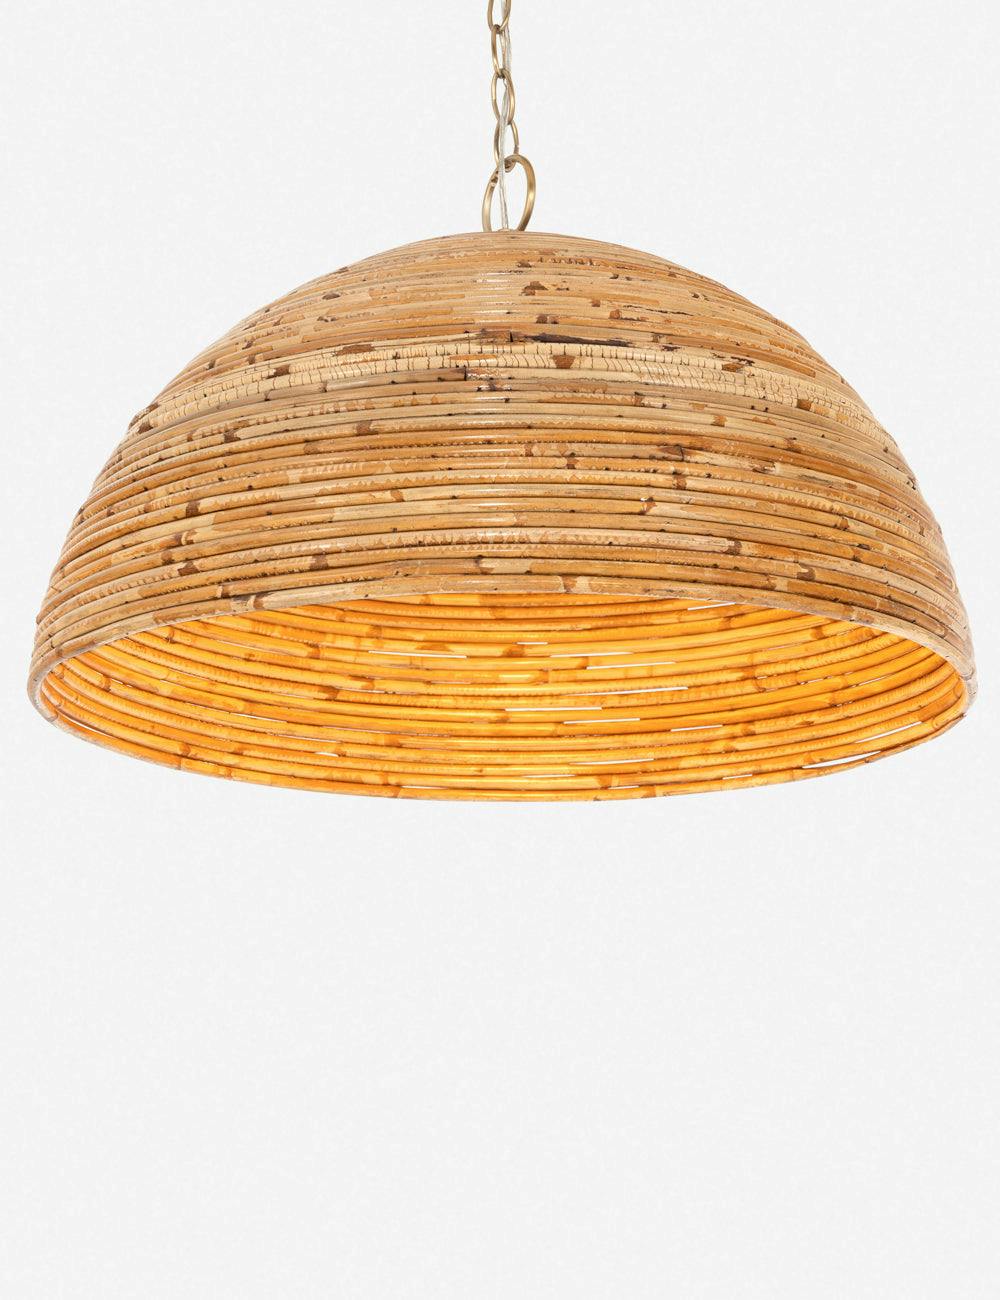 Satin Brass 60W LED Bowl Pendant with Natural Rattan Shade